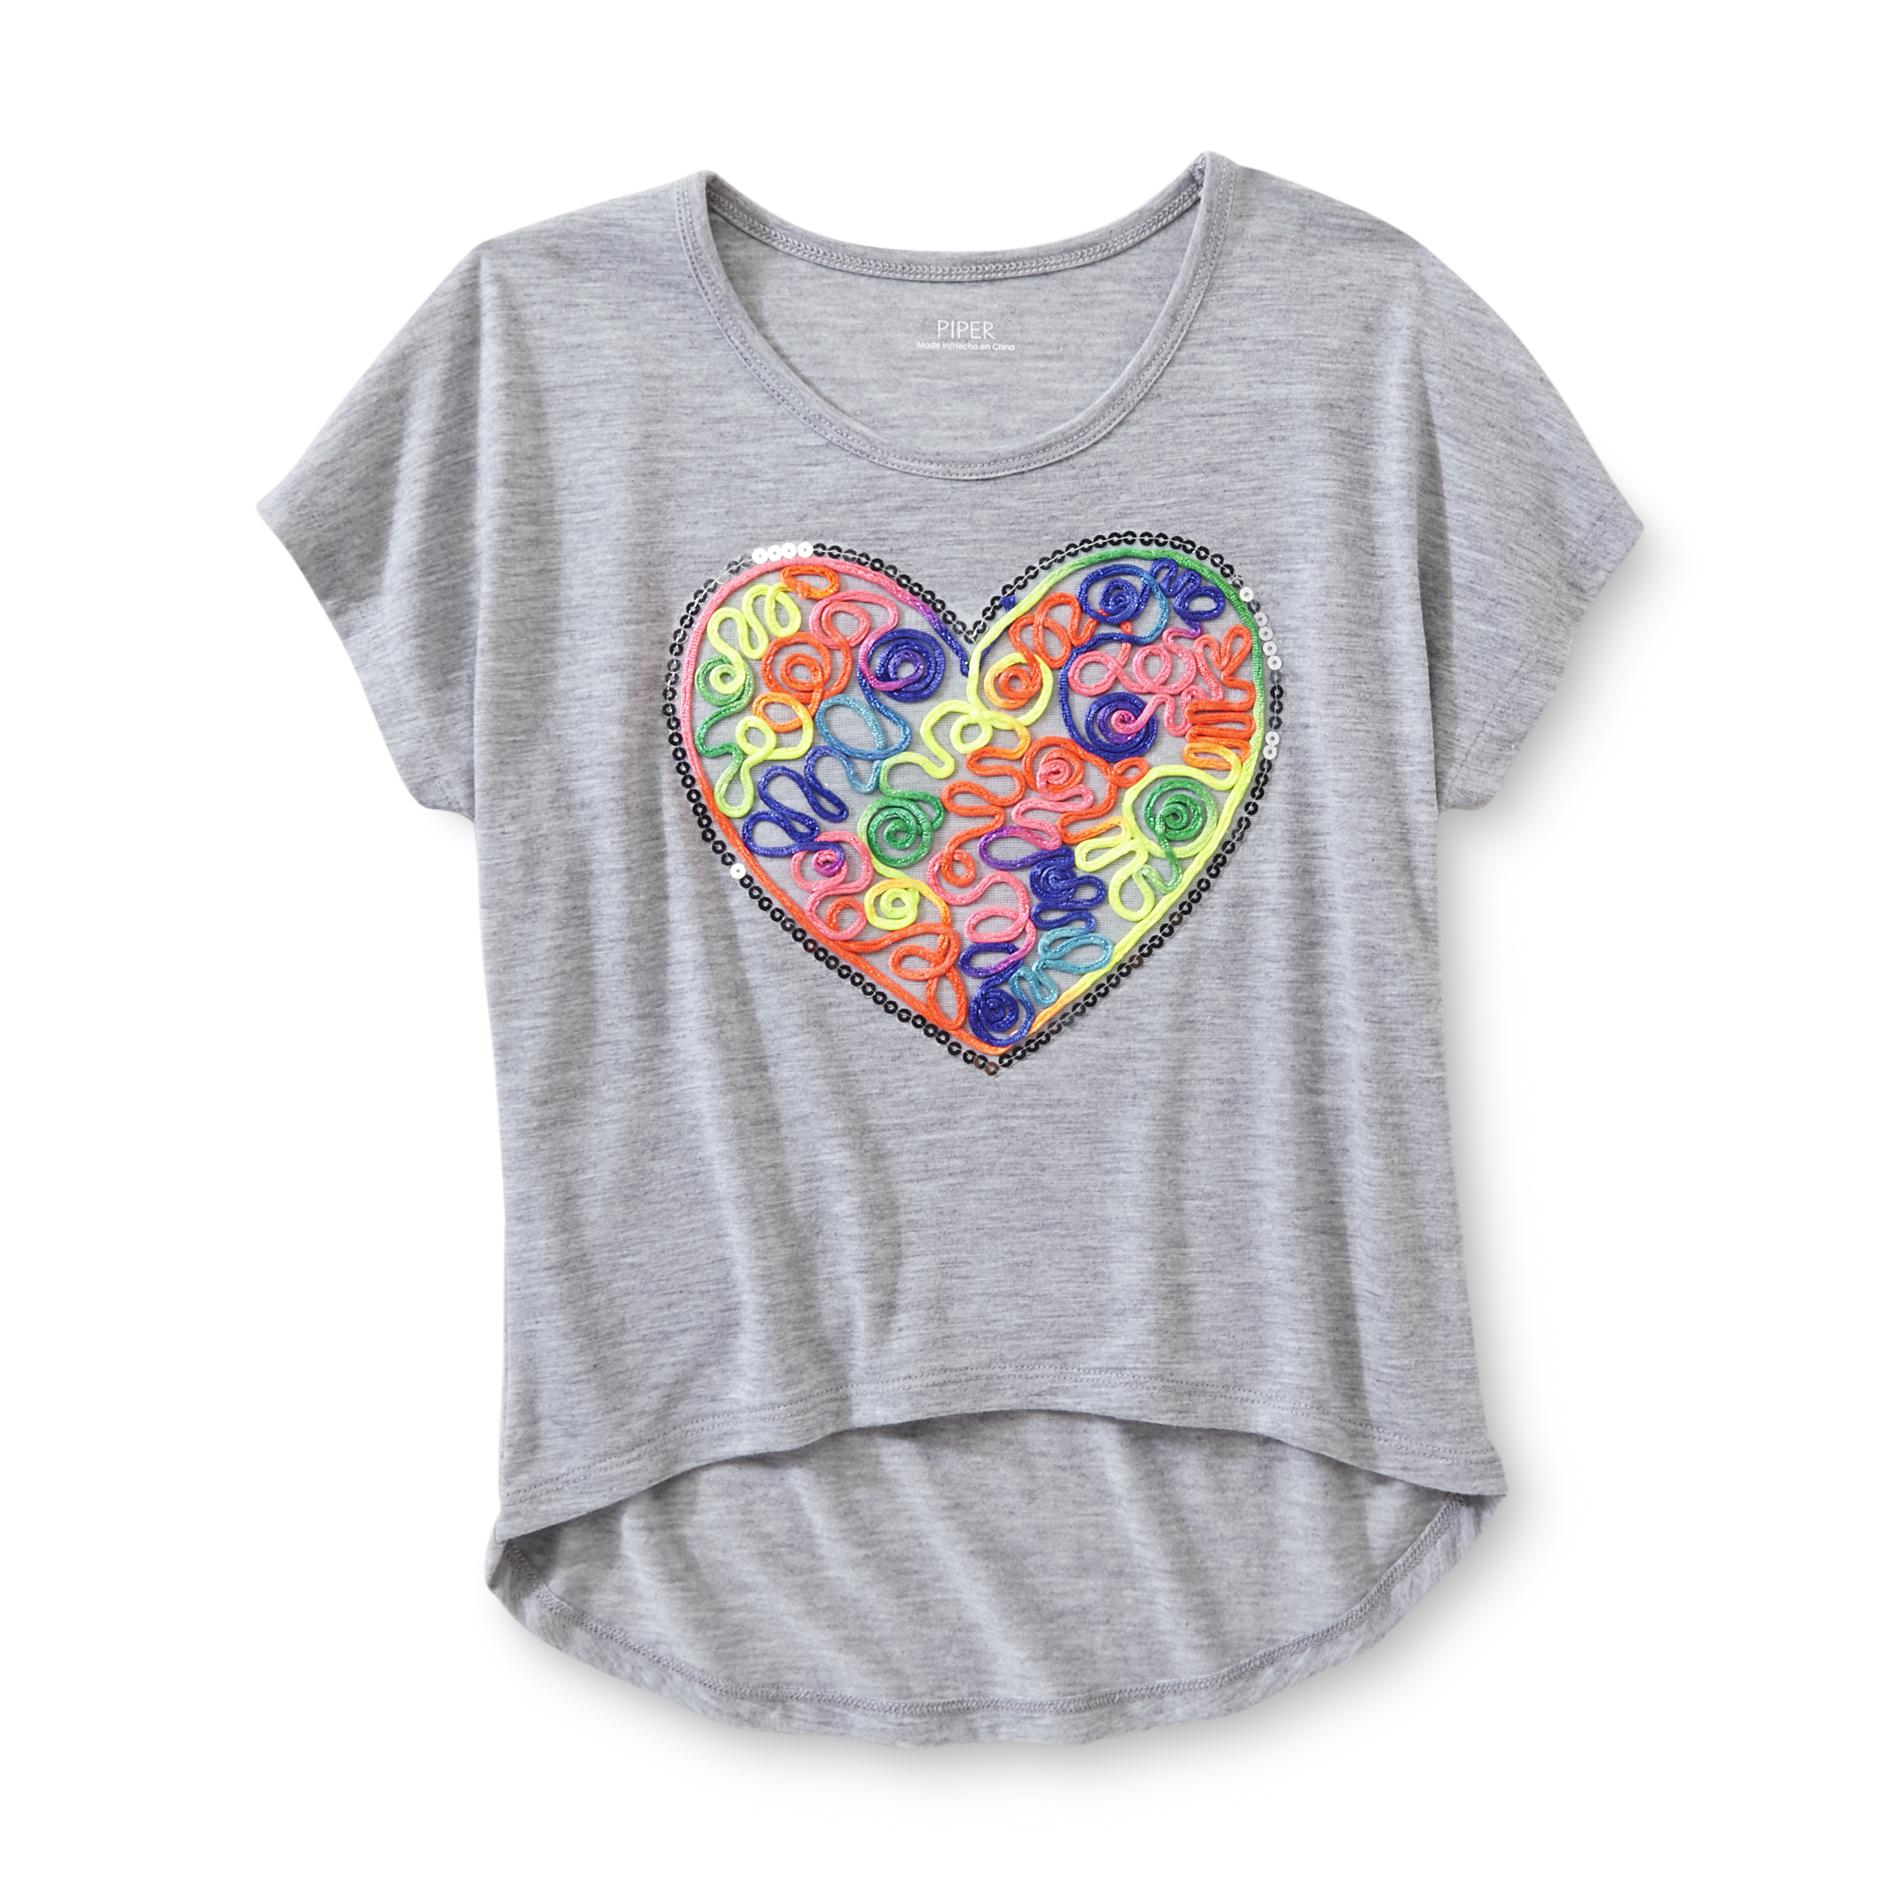 Piper Girl's Embellished Graphic T-Shirt - Love